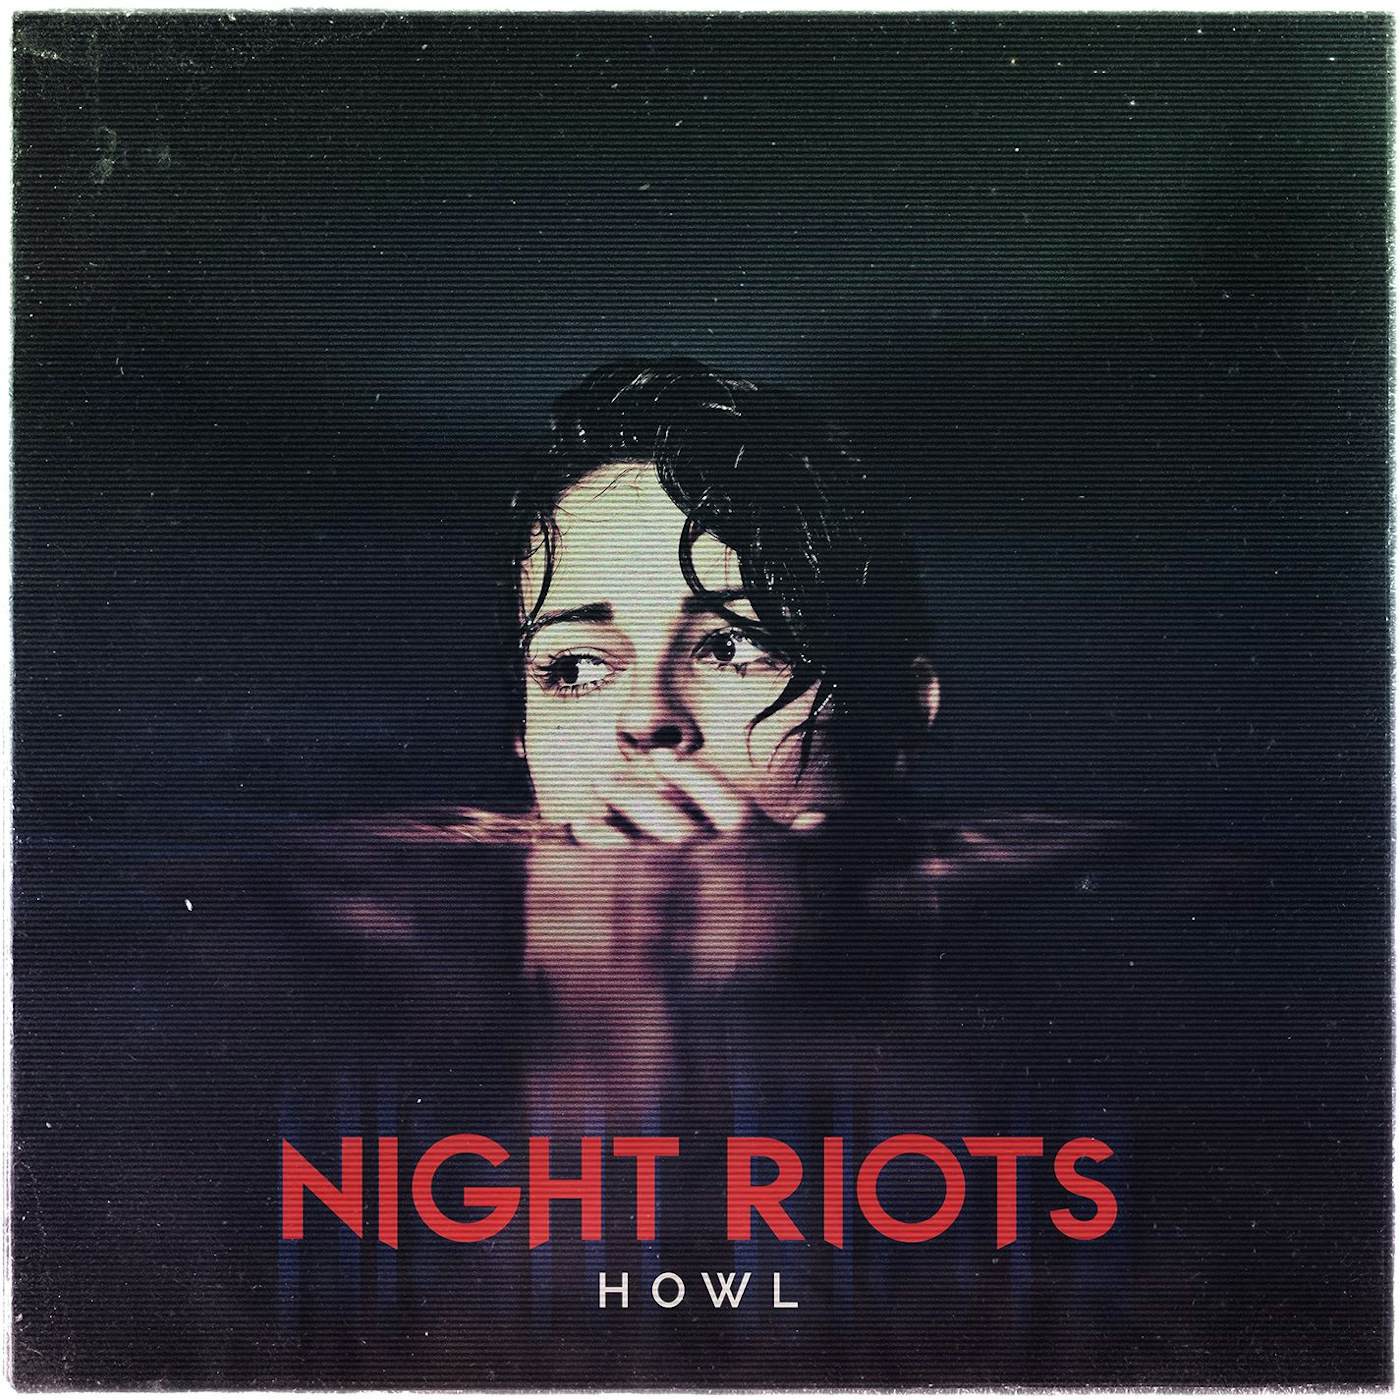 Night Riots Howl (Urban Outfitters Exclusi Vinyl Record